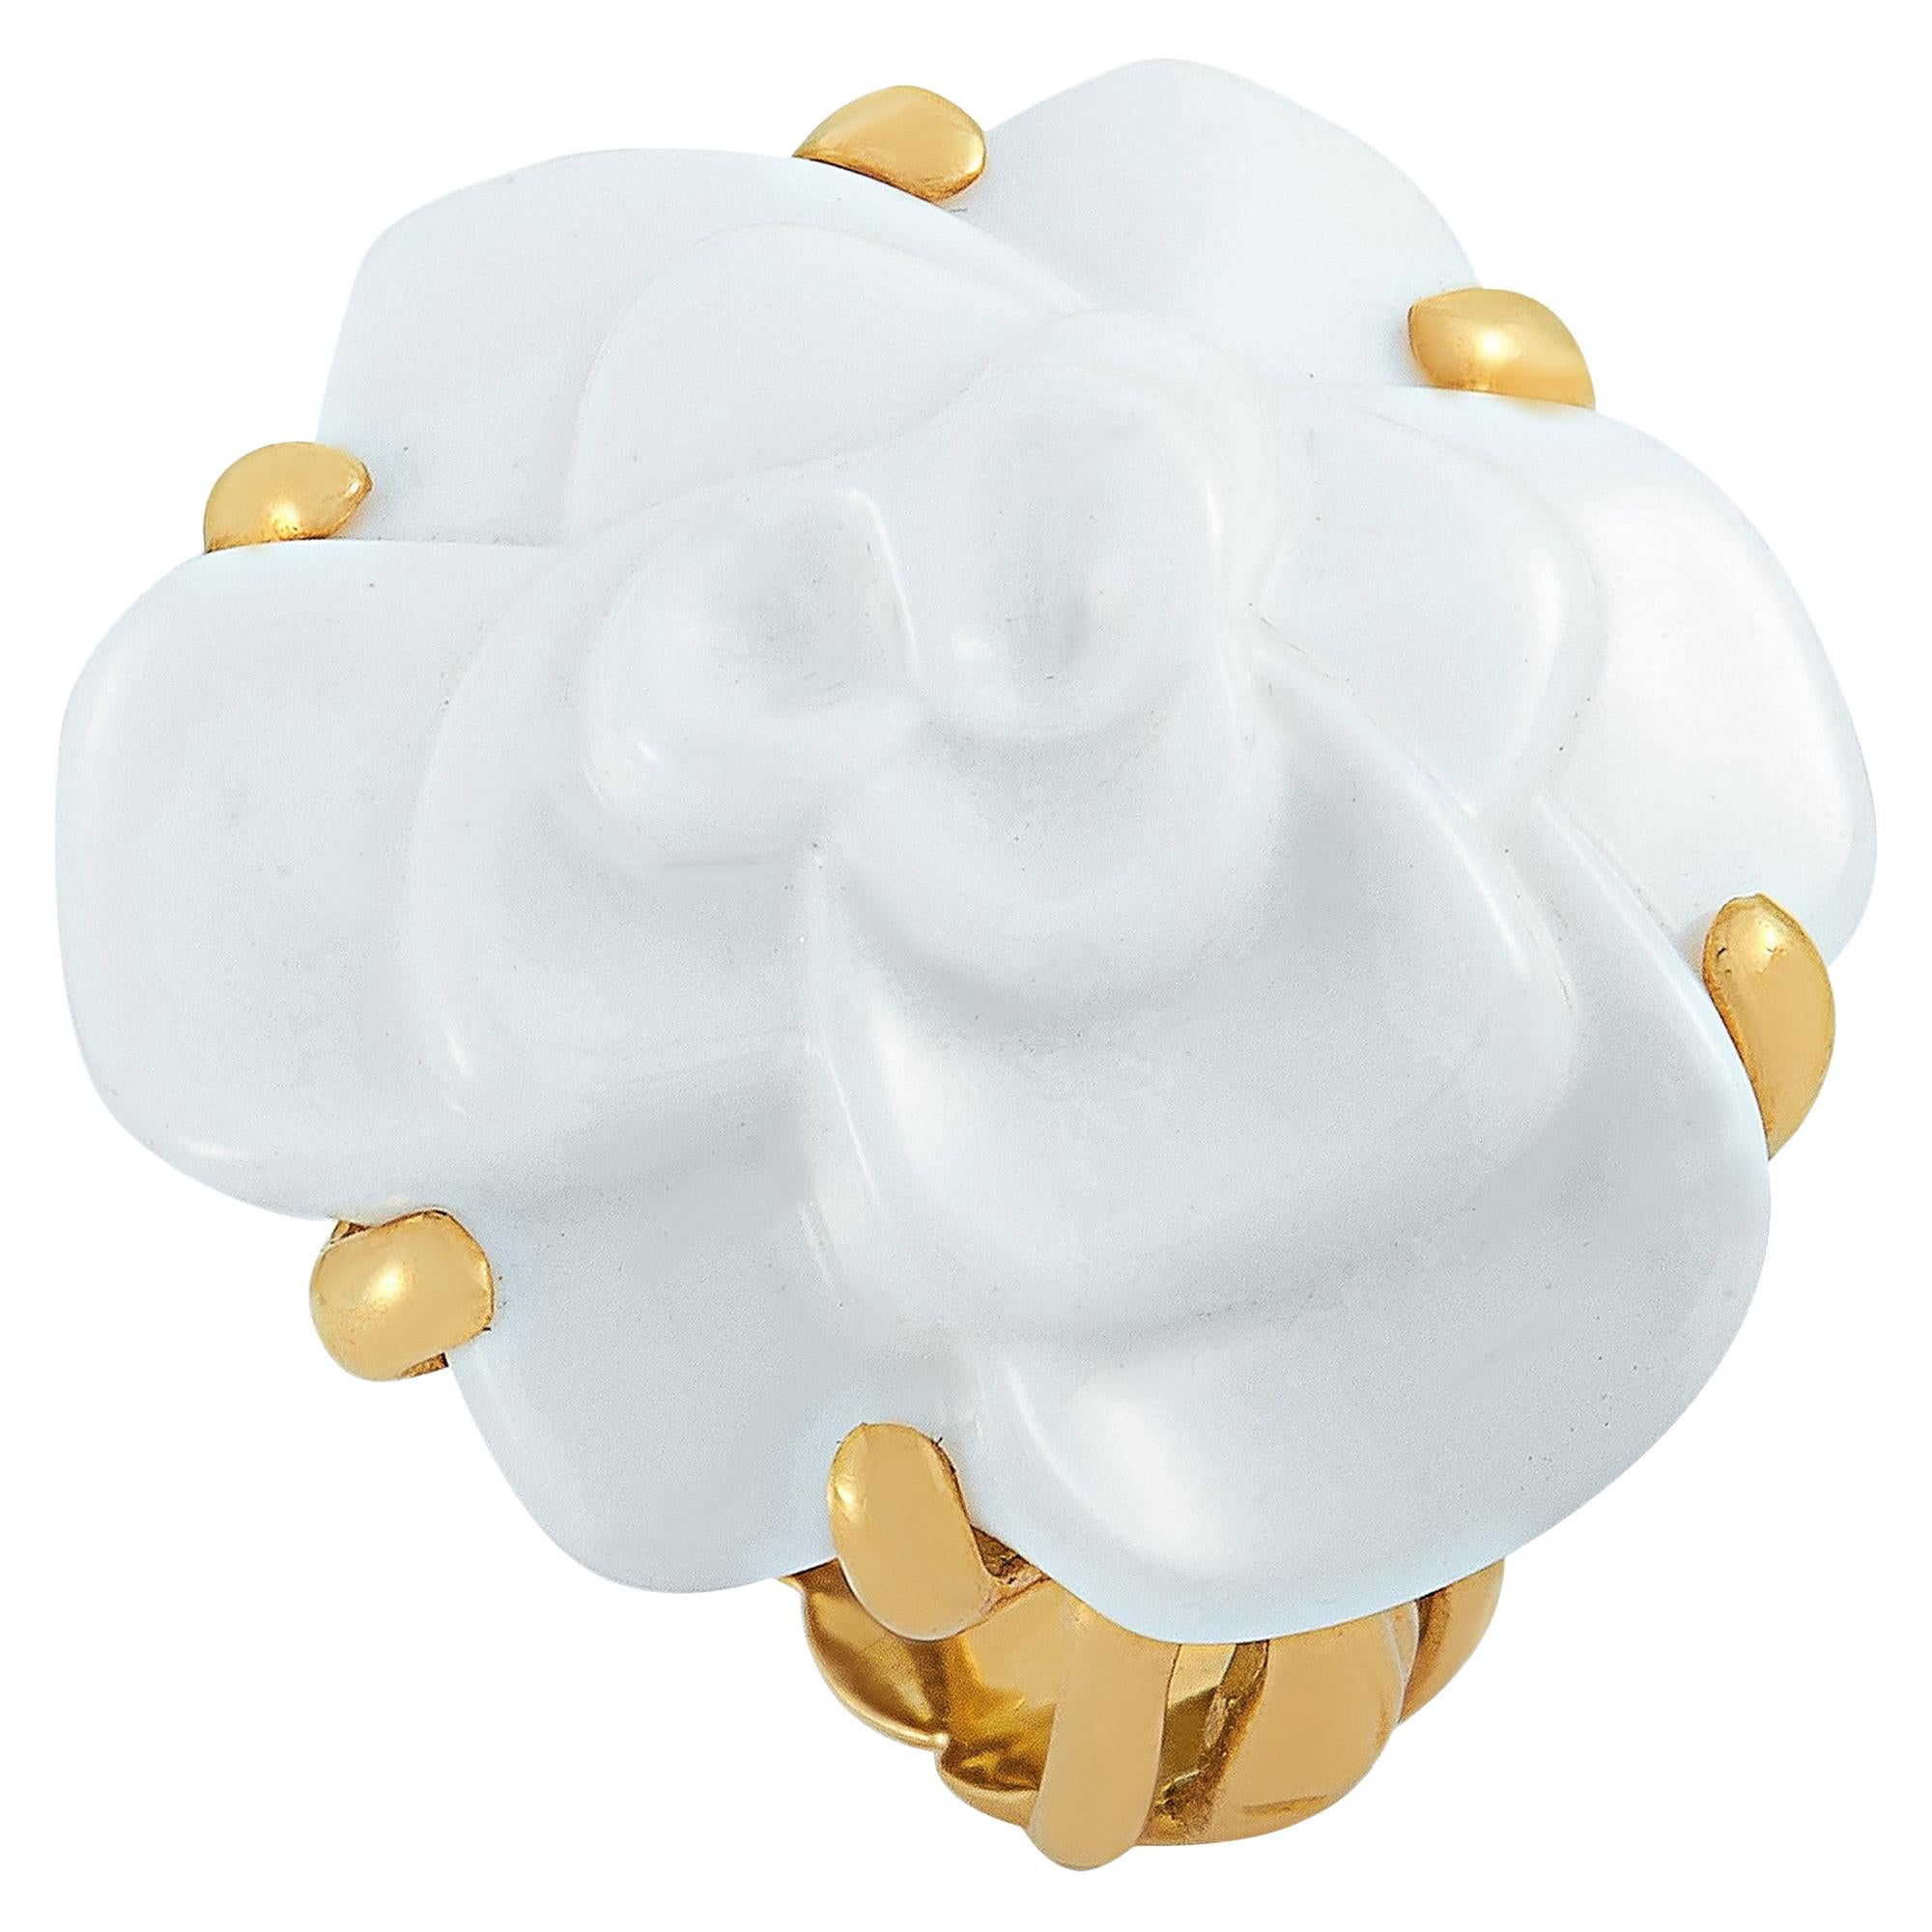 Chanel Camélia 18 Karat Yellow Gold and White Agate Ring